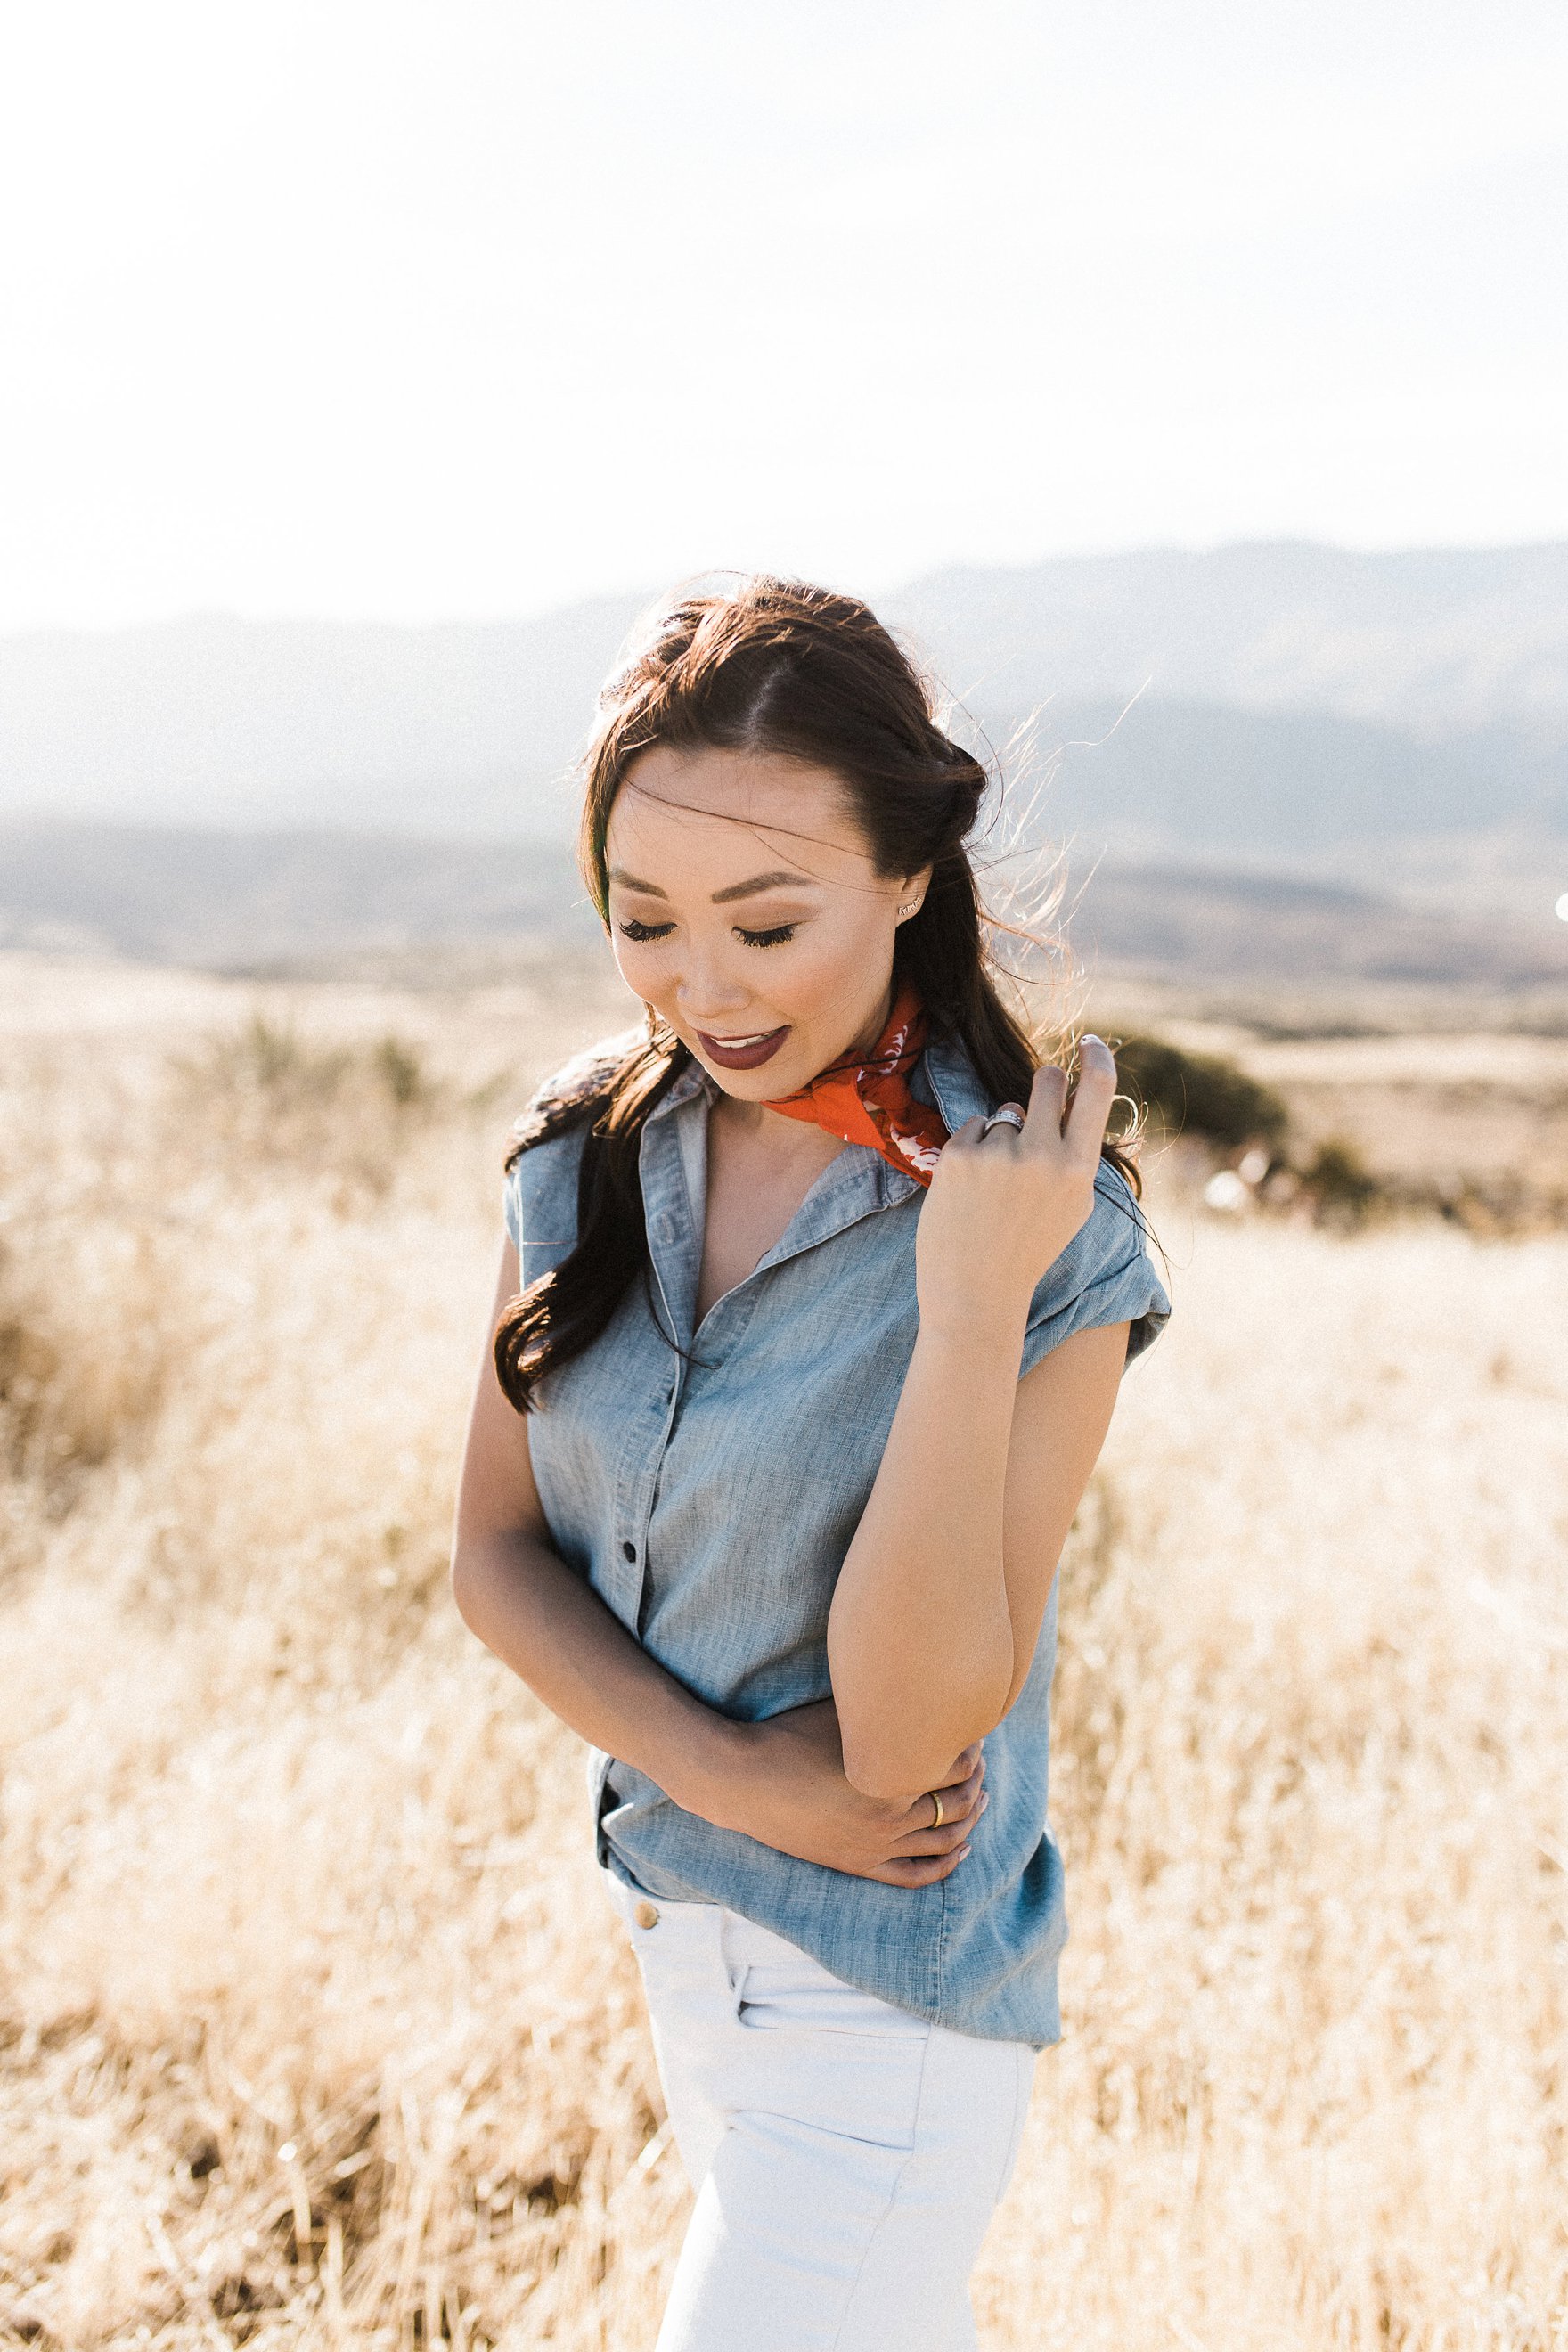 chambray short sleeved shirt white jeans with booties in tall dry grass in the arizona phoenix desert wearing red scarf around neck